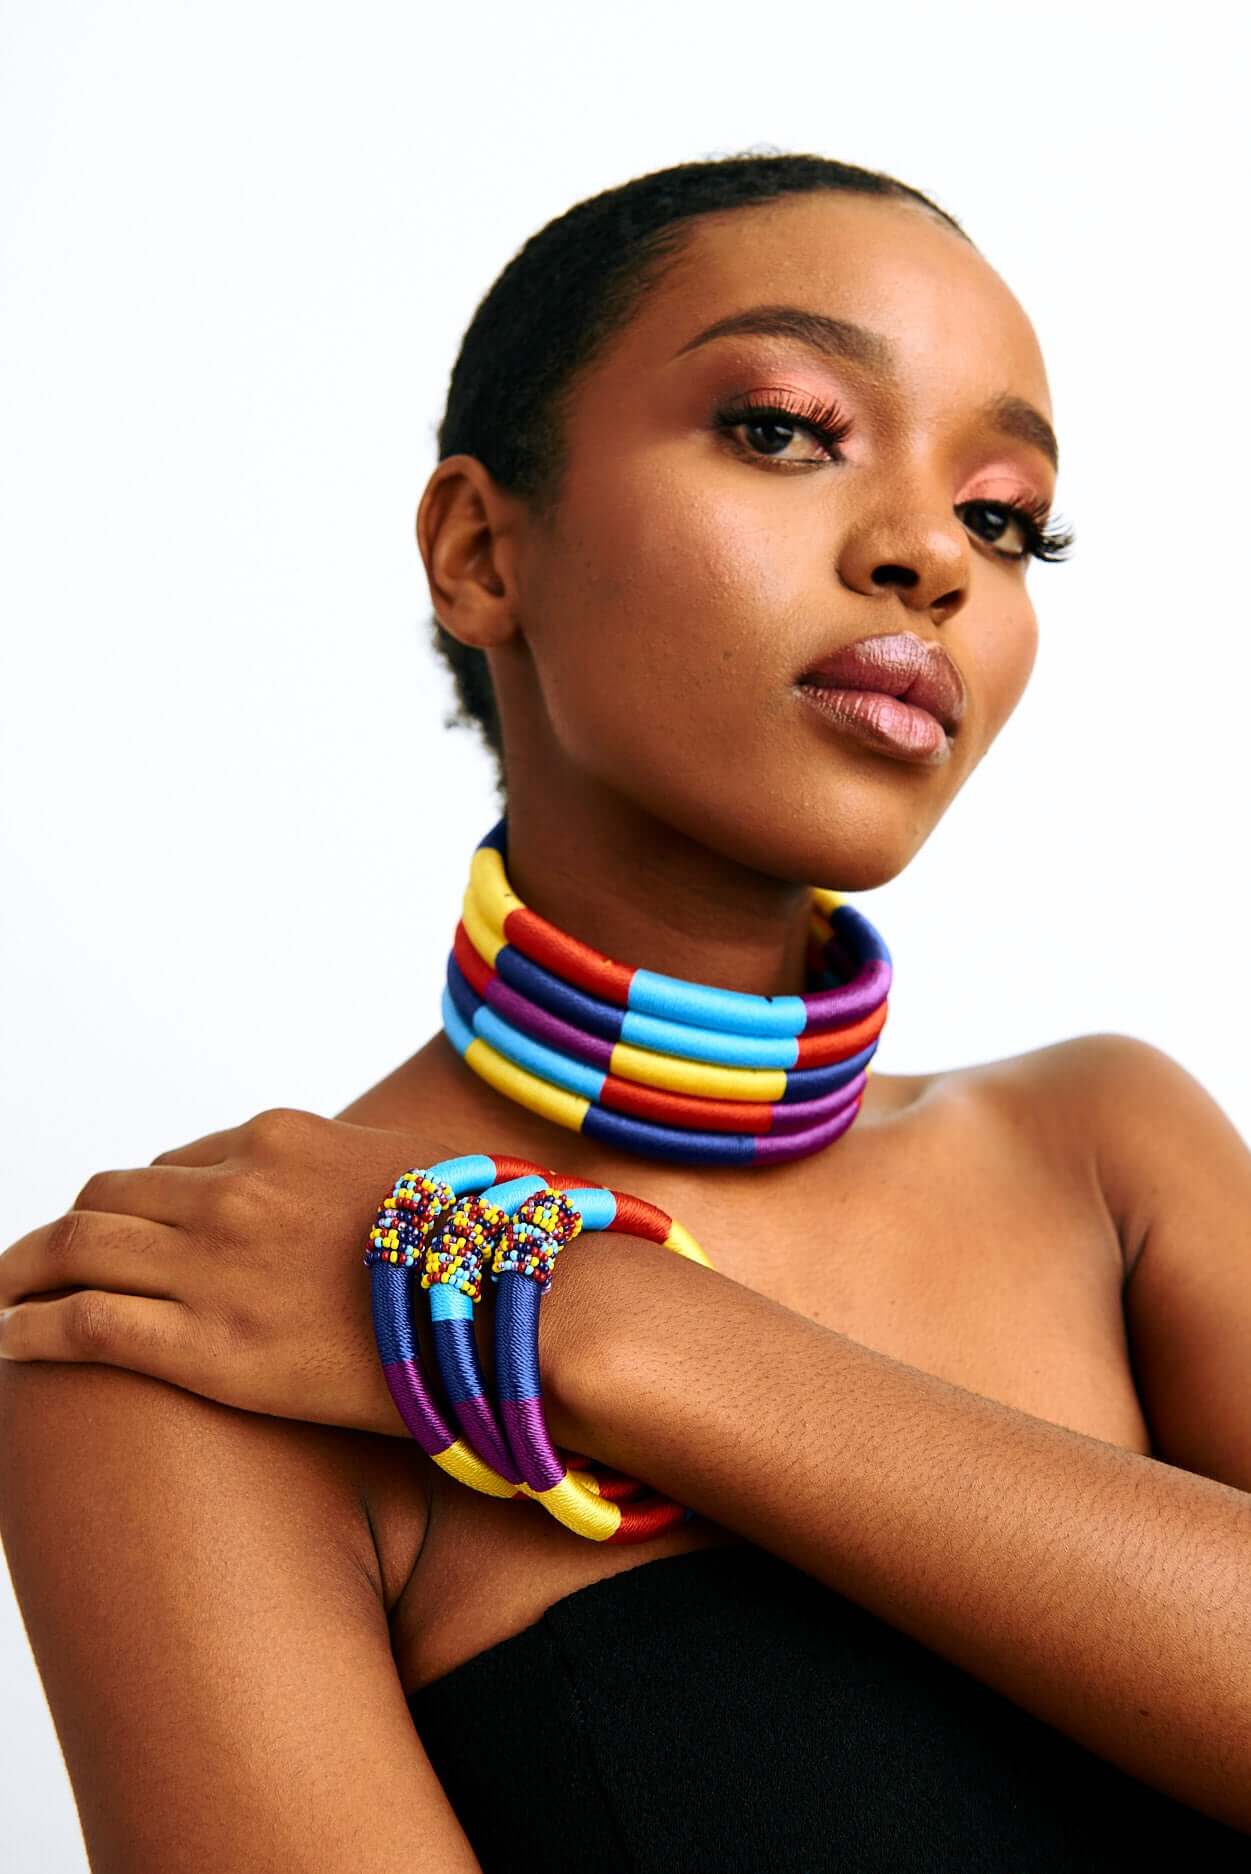 Shop Wendo Choker by Epica Jewellery on Arrai. Discover stylish, affordable clothing, jewelry, handbags and unique handmade pieces from top Kenyan & African fashion brands prioritising sustainability and quality craftsmanship.